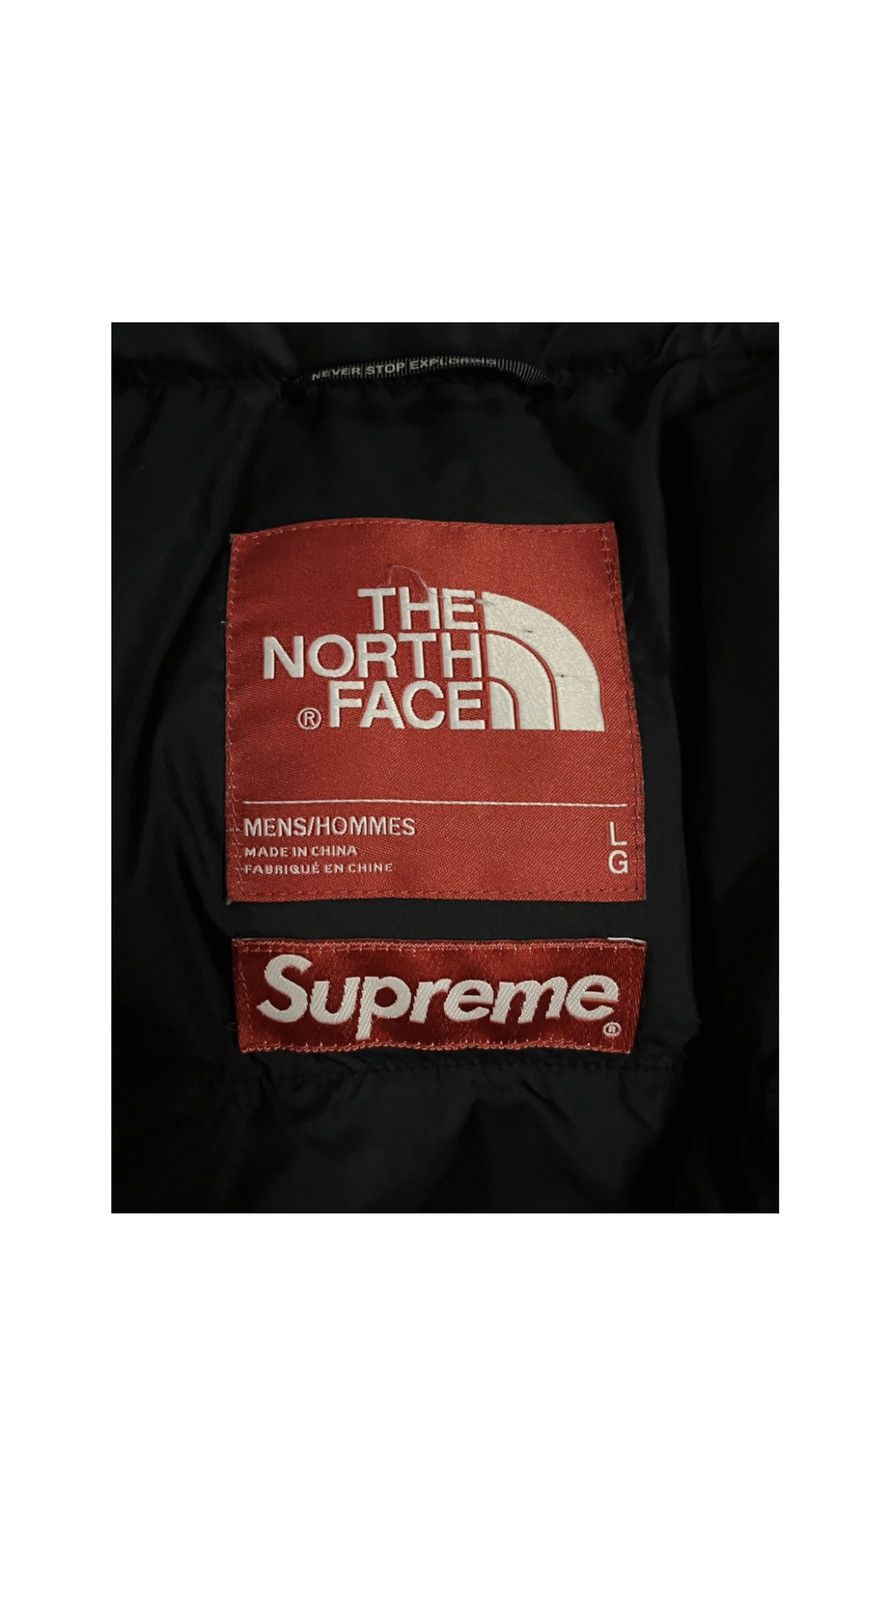 Supreme Supreme X Northface “By Any Means Necessary” print jacket Size US L / EU 52-54 / 3 - 2 Preview